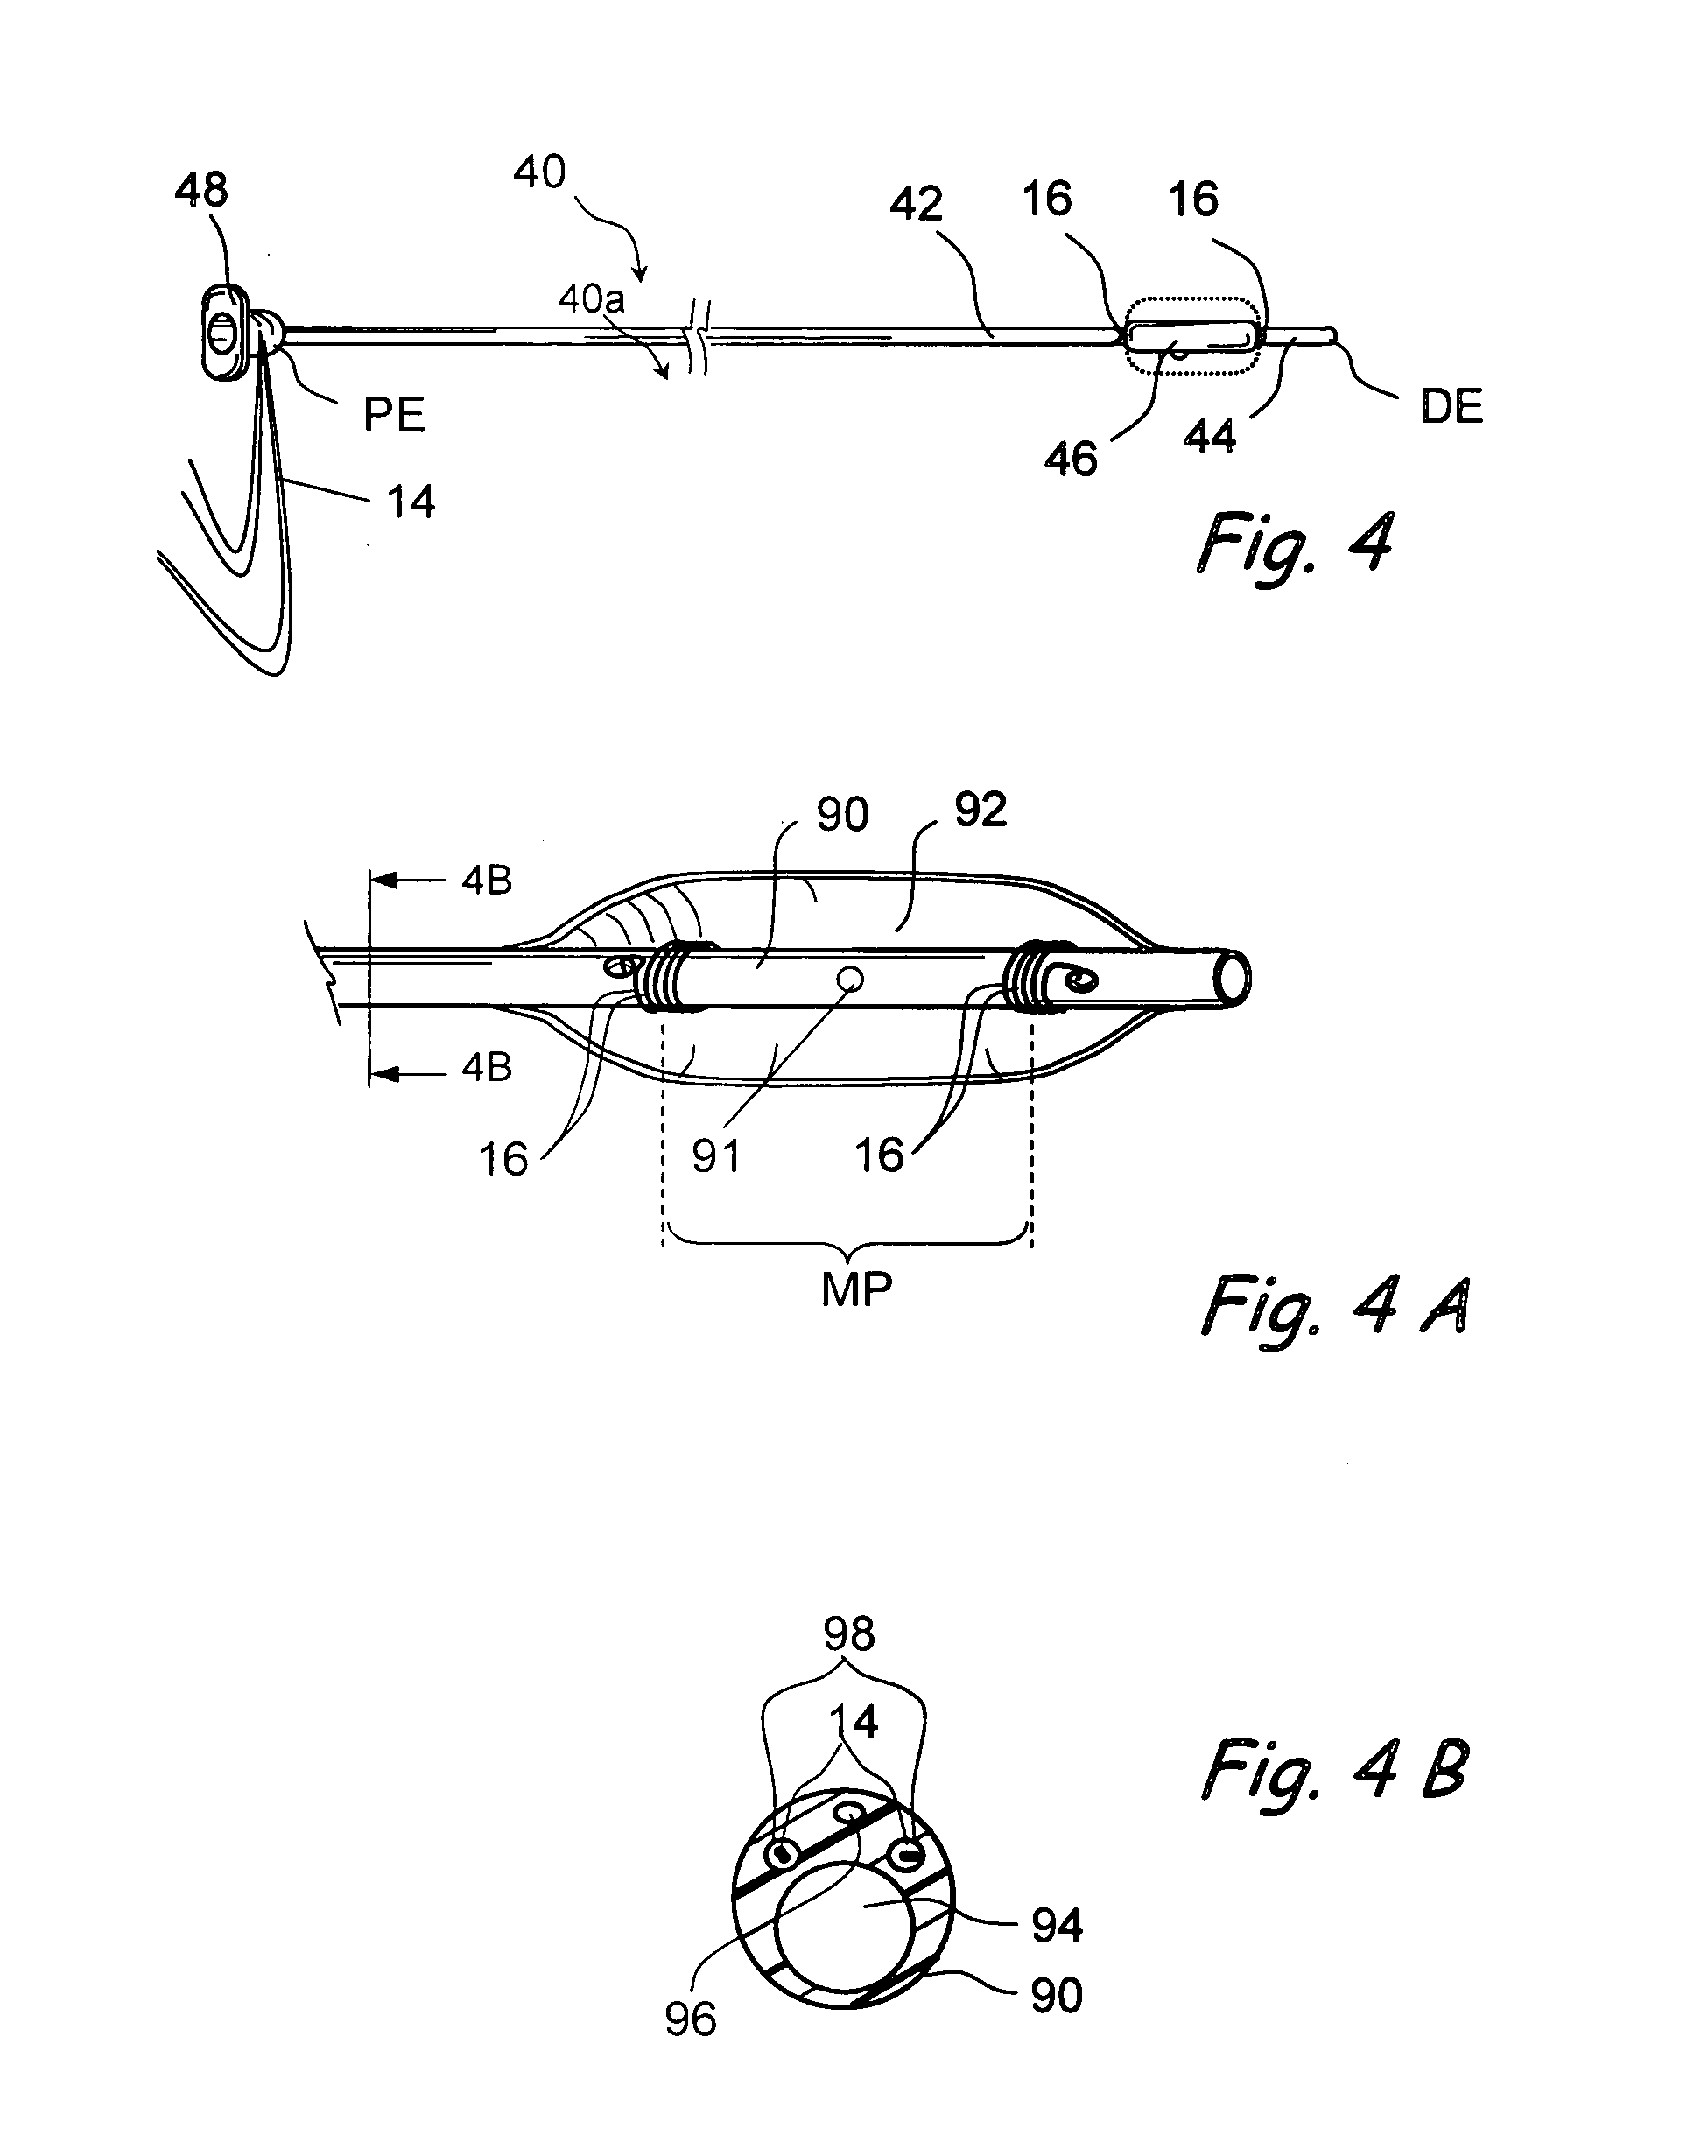 Systems and methods for performing image guided procedures within the ear, nose, throat and paranasal sinuses